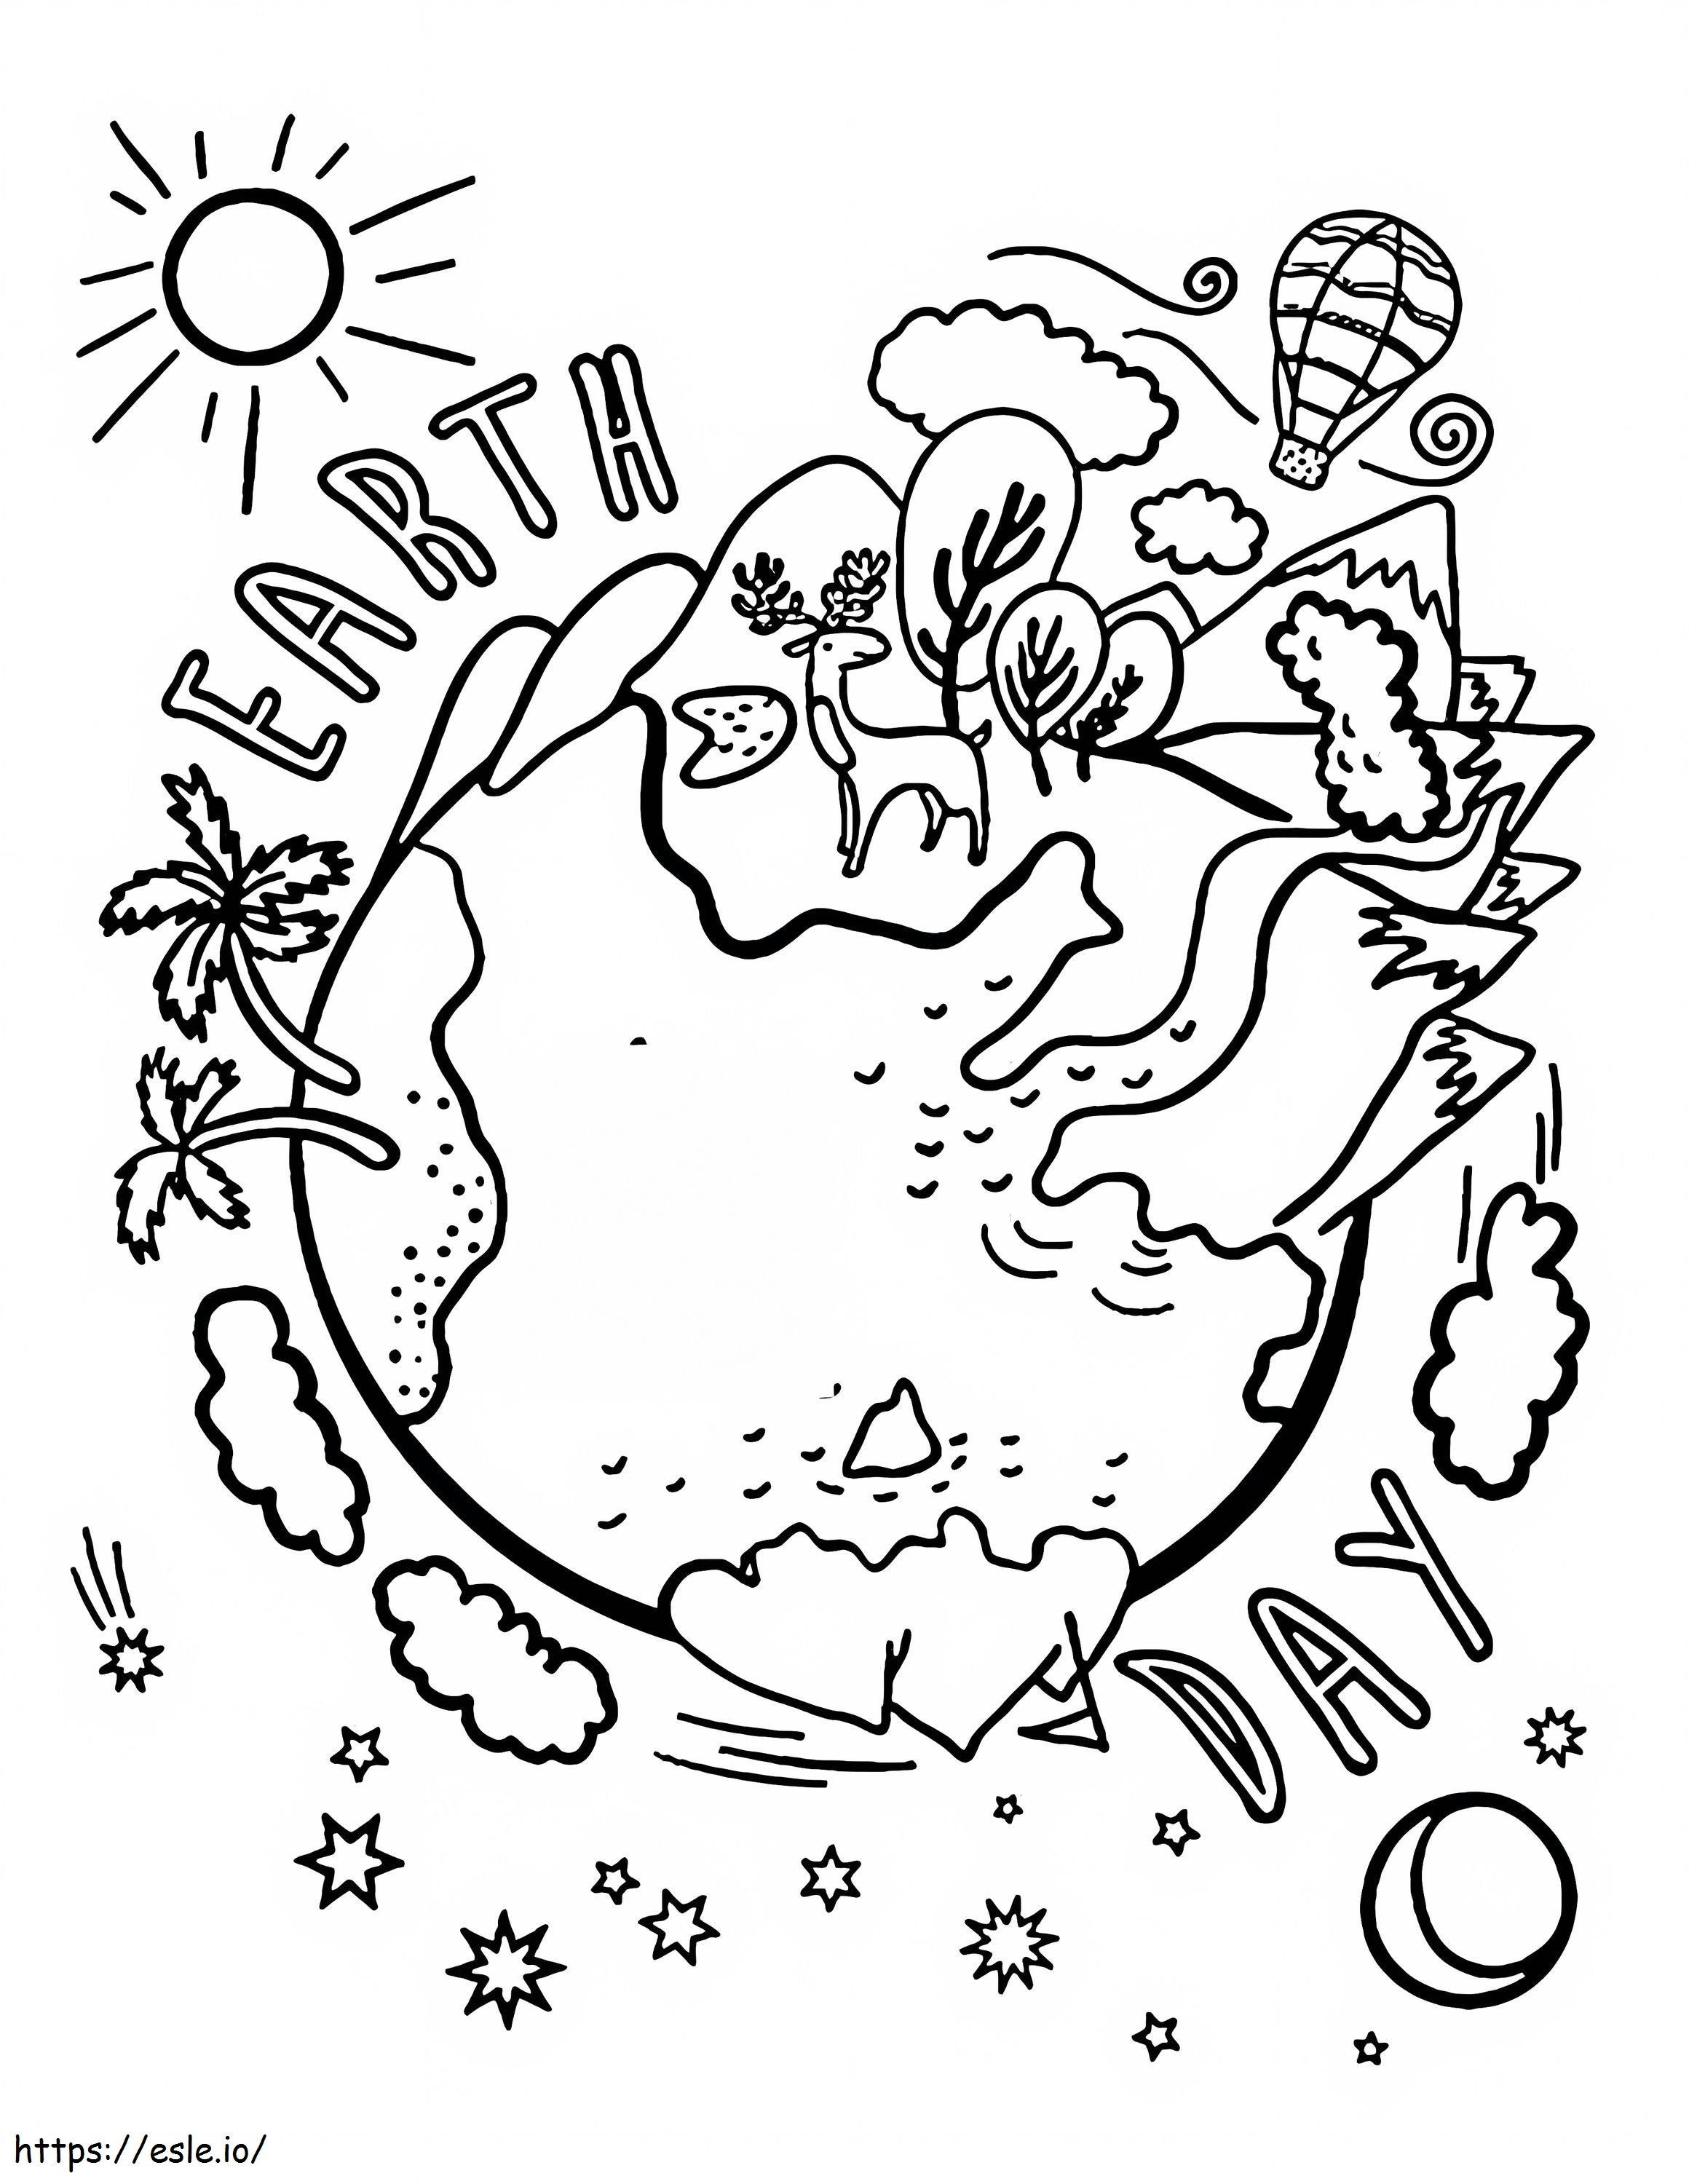 Earth Day 4 coloring page